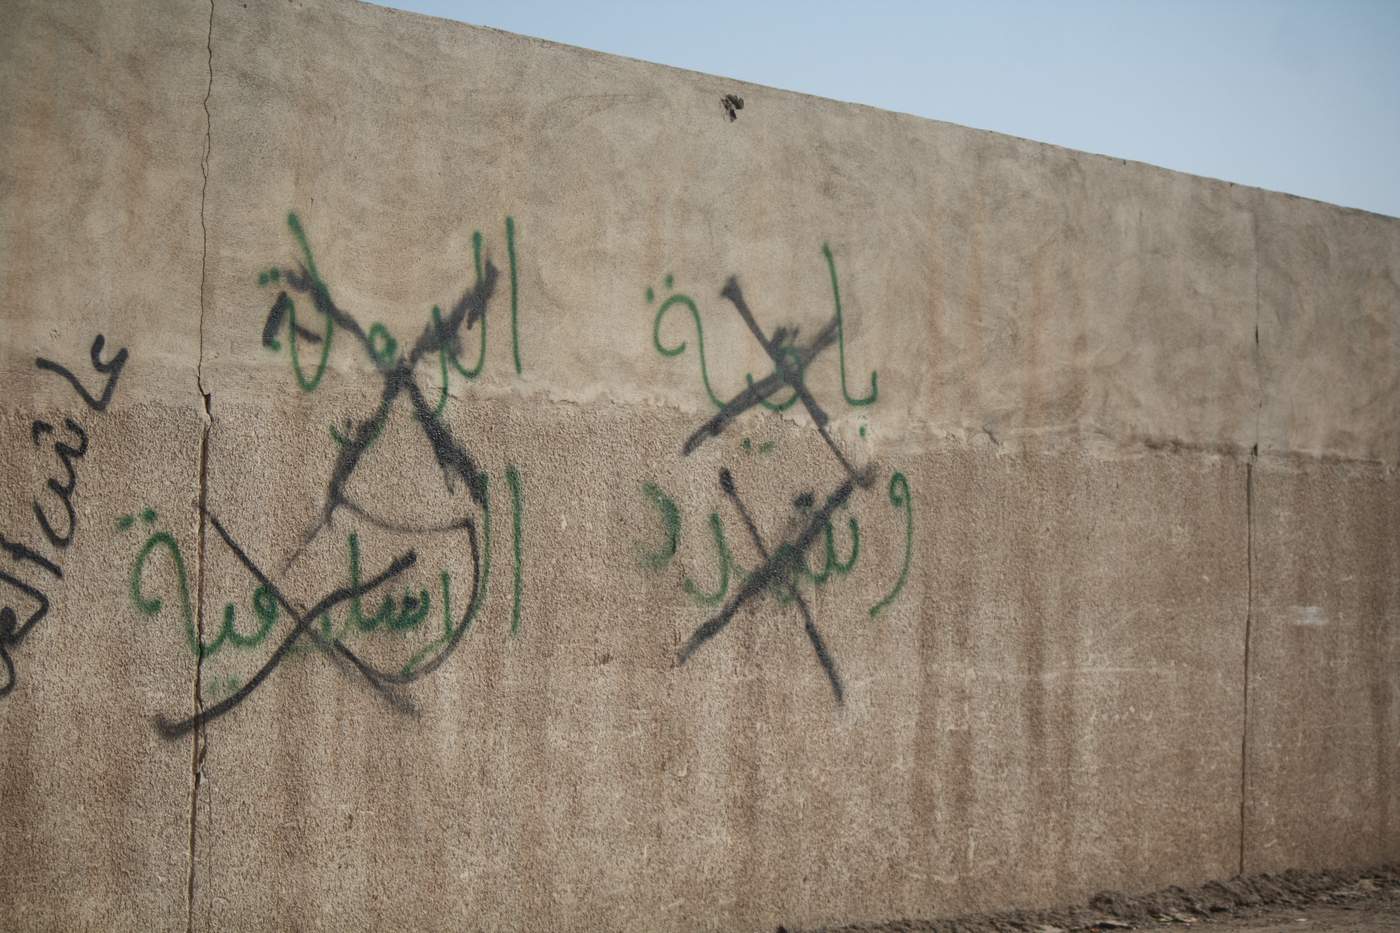 Graffiti in Mosul, Iraq, proclaimed &quot;Islamic State remains&quot; before it was crossed out as Iraqi forces took back the neighborhood on Jan. 11, 2017. (H. Murdock\/VOA)